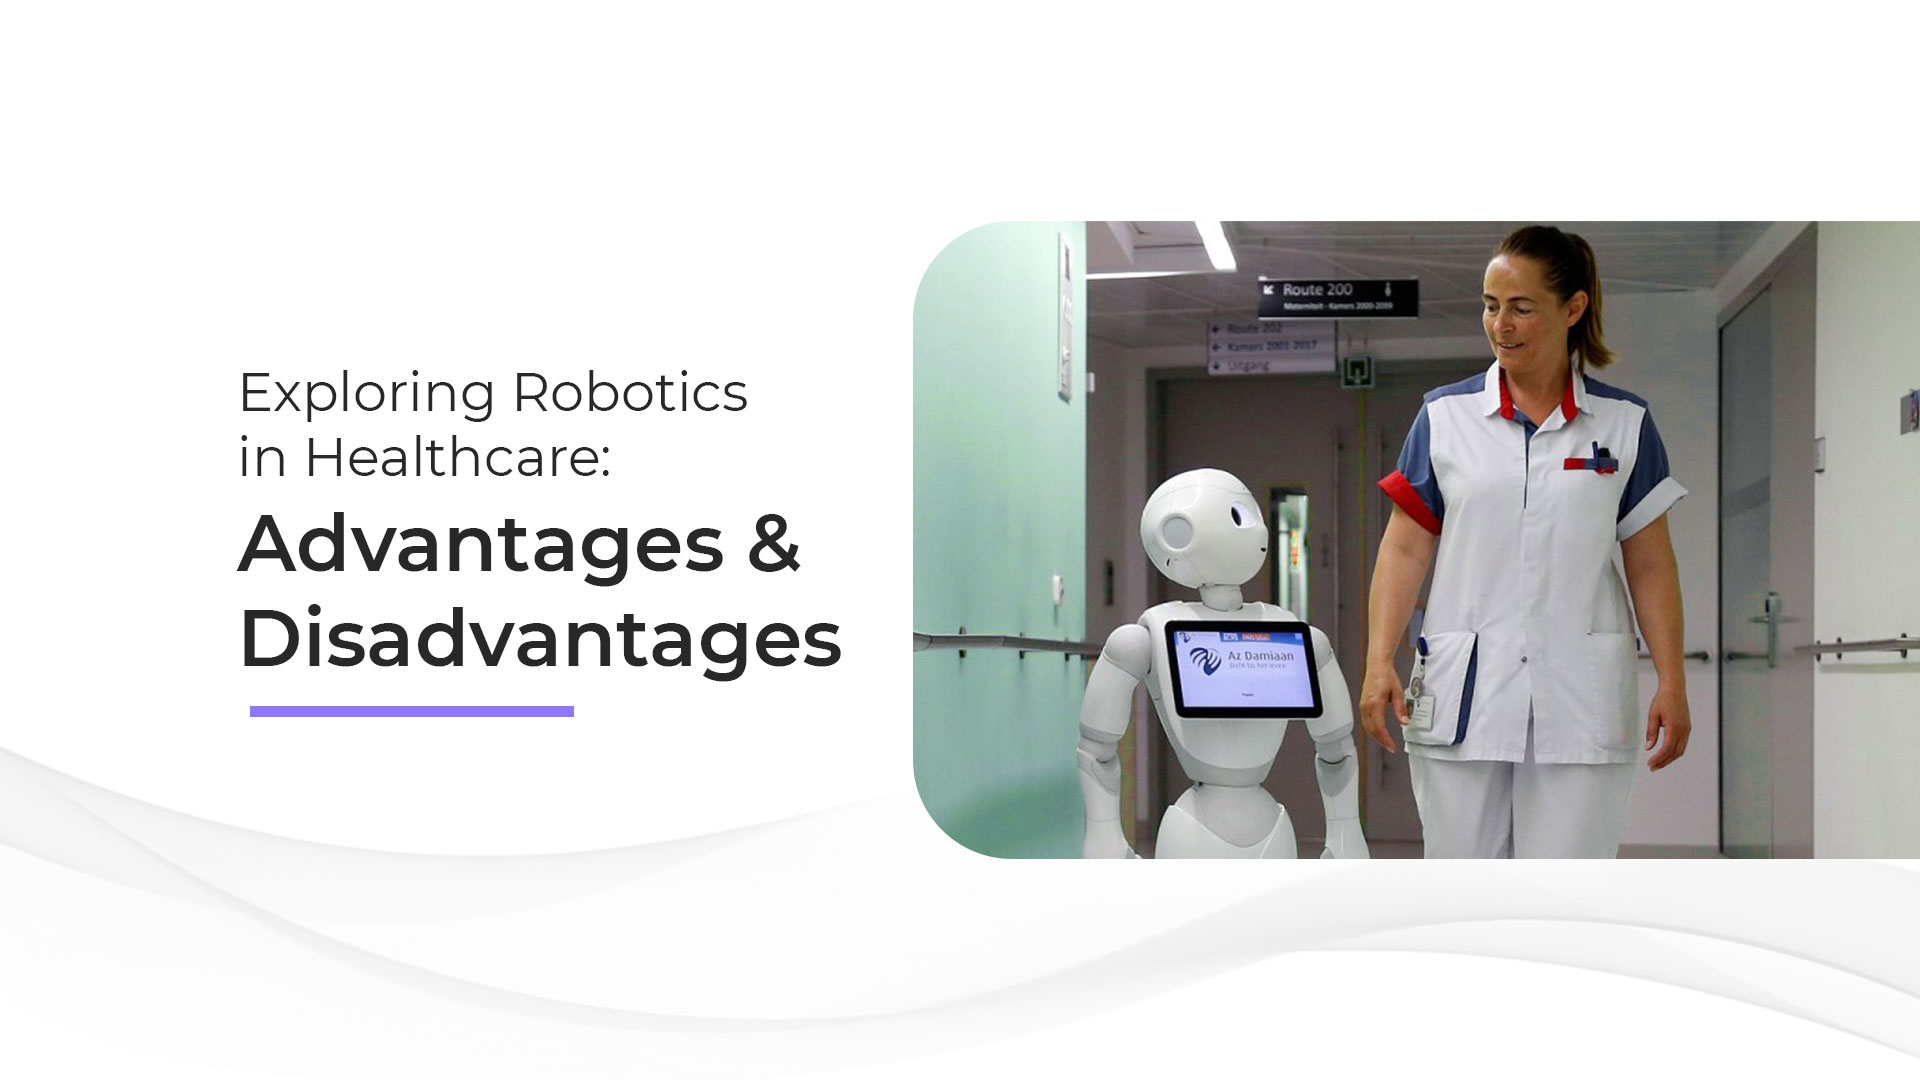 Advantages and disadvantages of robotics in healthcare